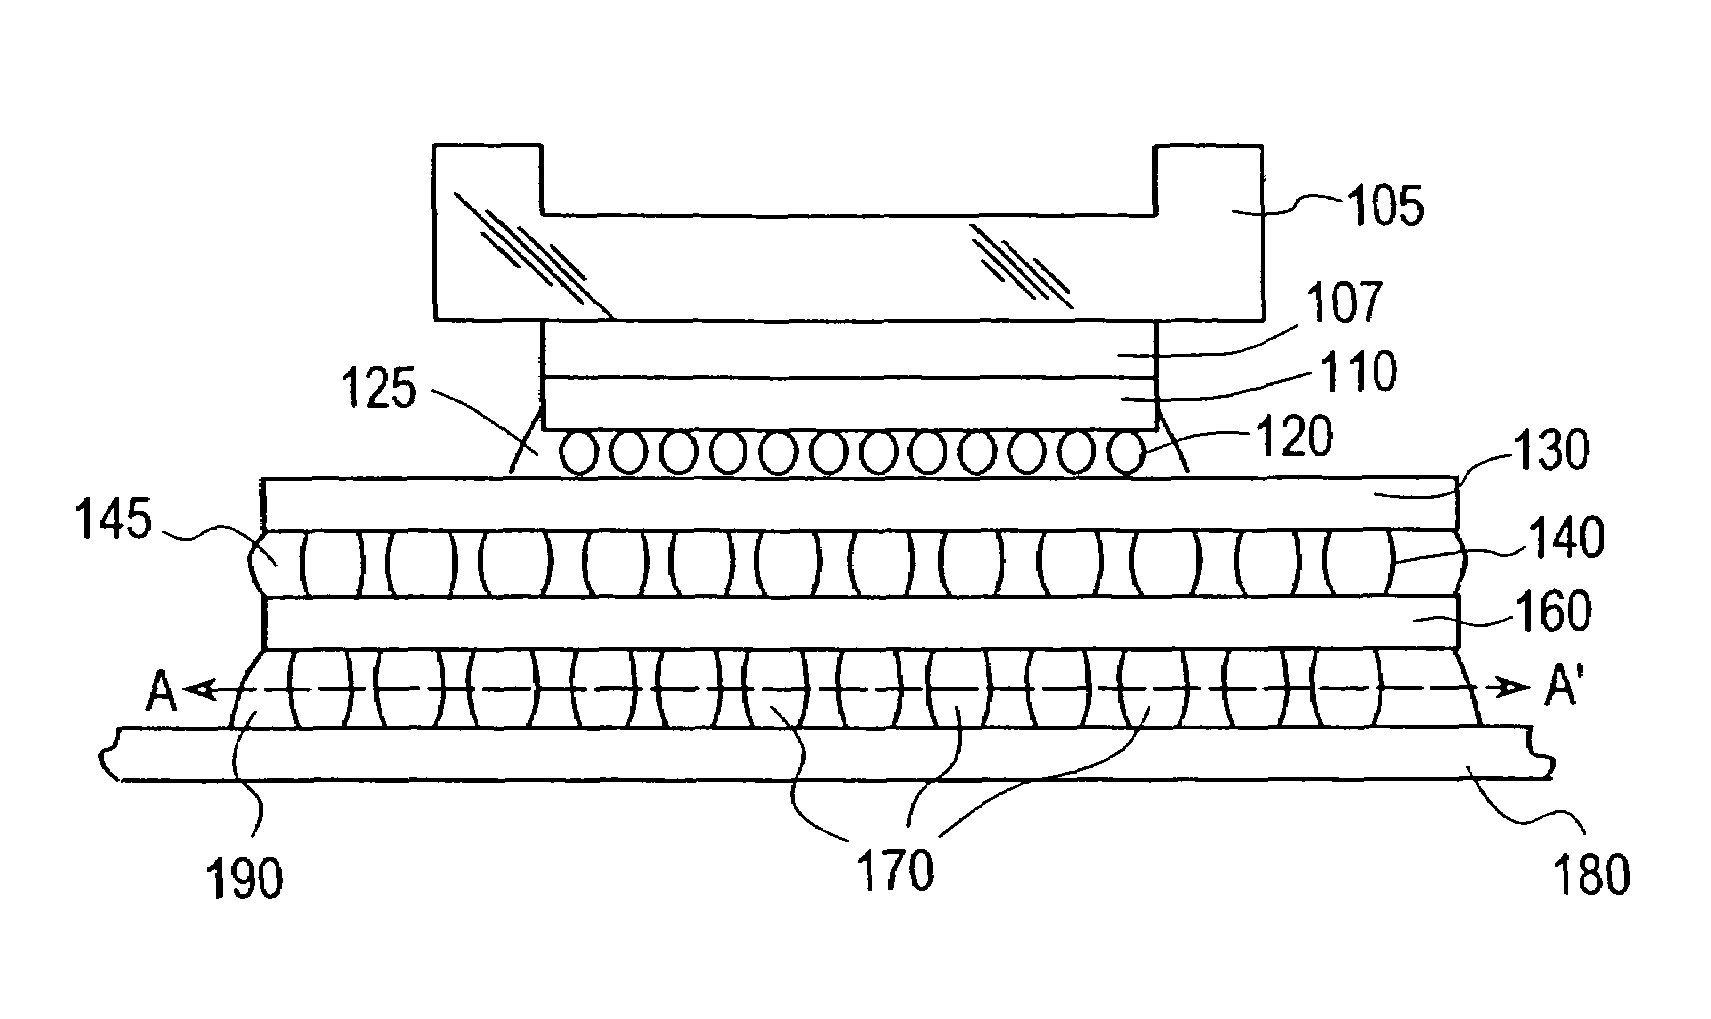 Solder interconnection array with optimal mechanical integrity